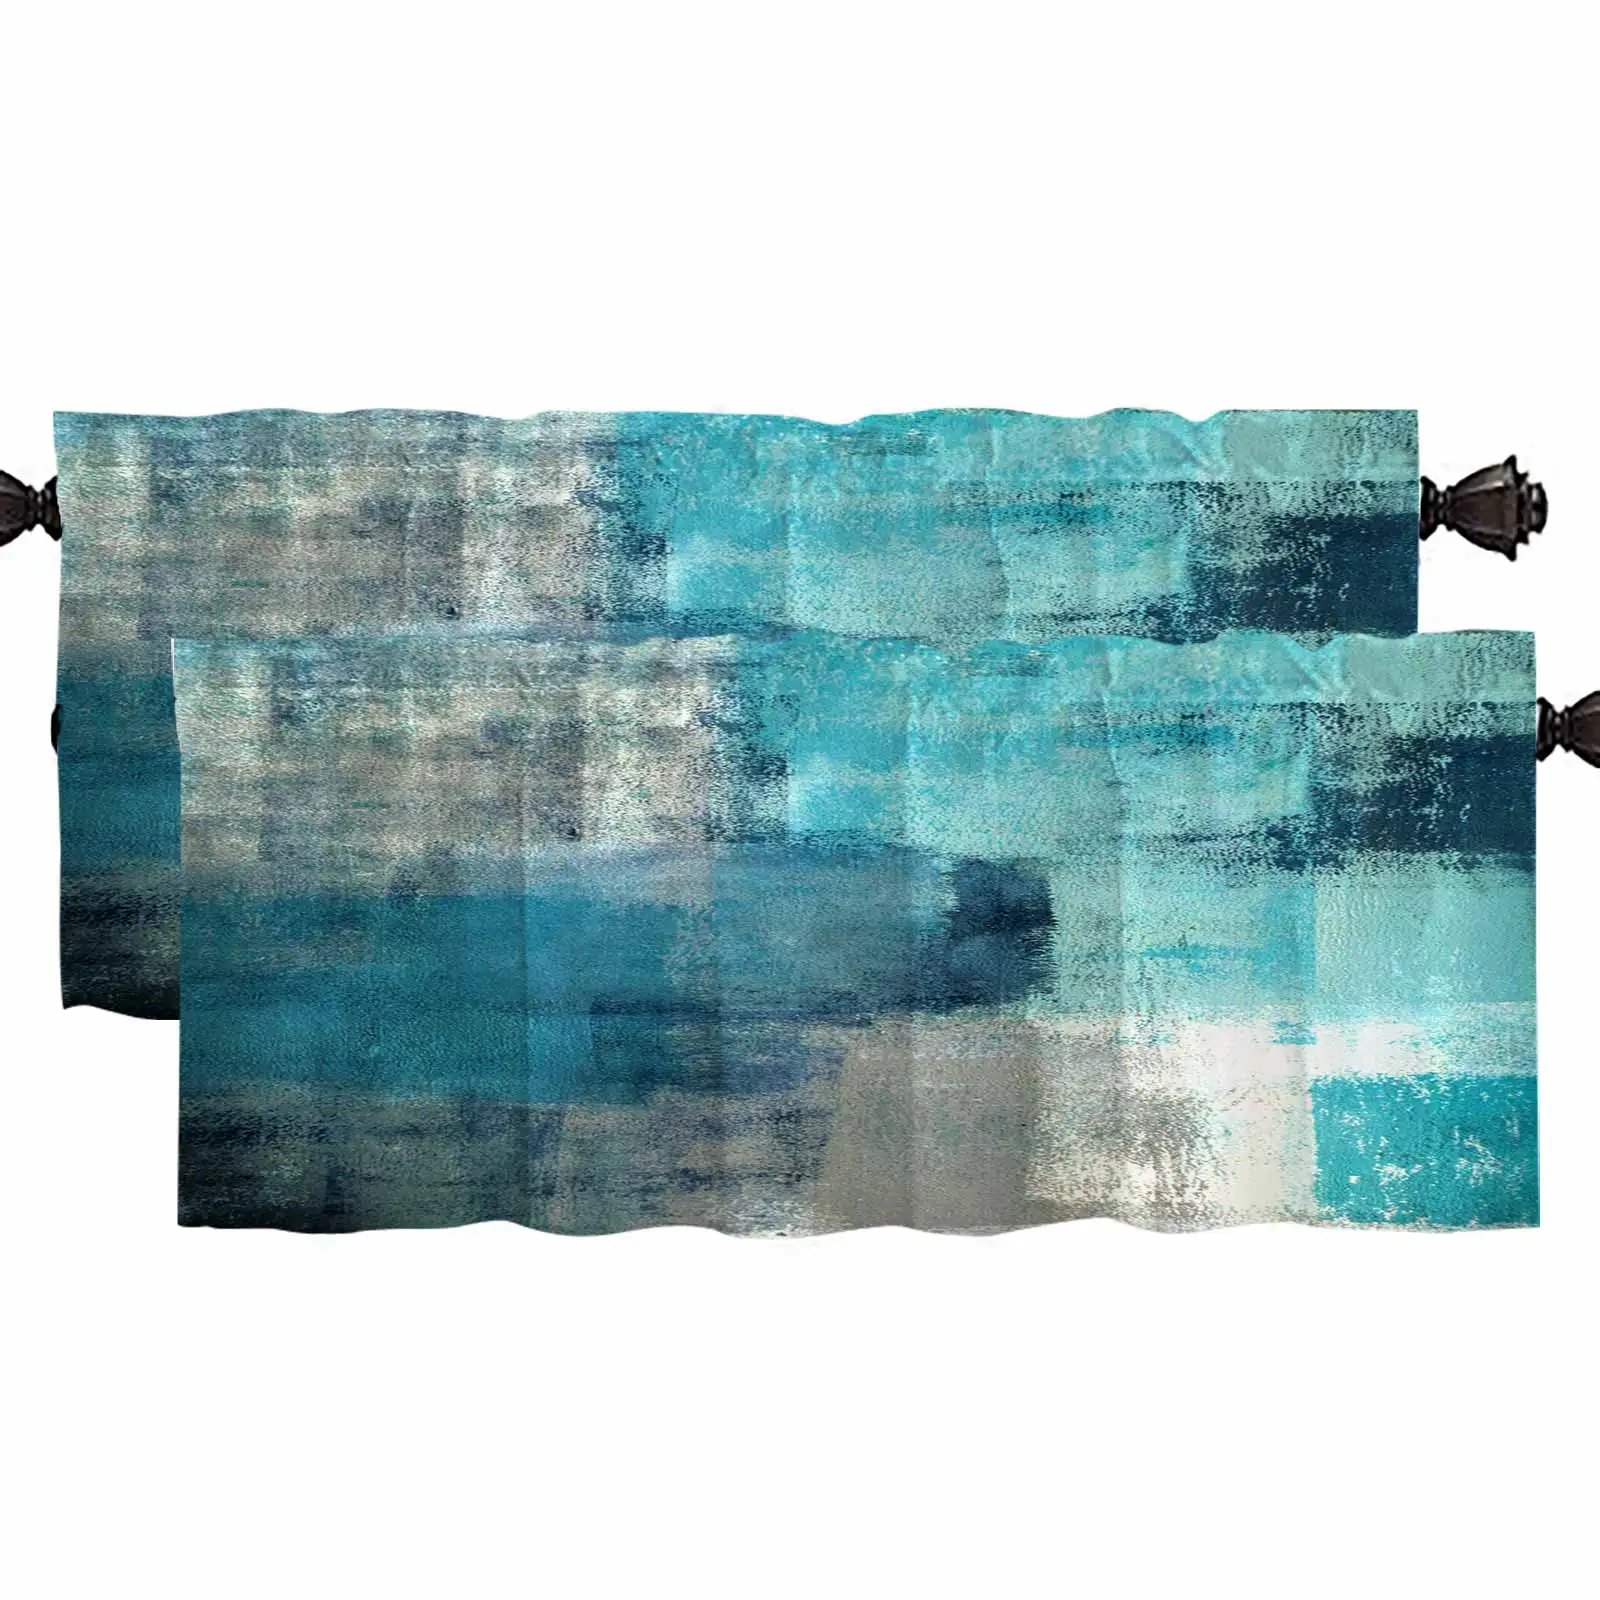 

Musesh Set of 2 Turquoise Blue Grey Kitchen Window Treatment Valance Curtains Use for Bedroom Bathroom Living Room Dininghall